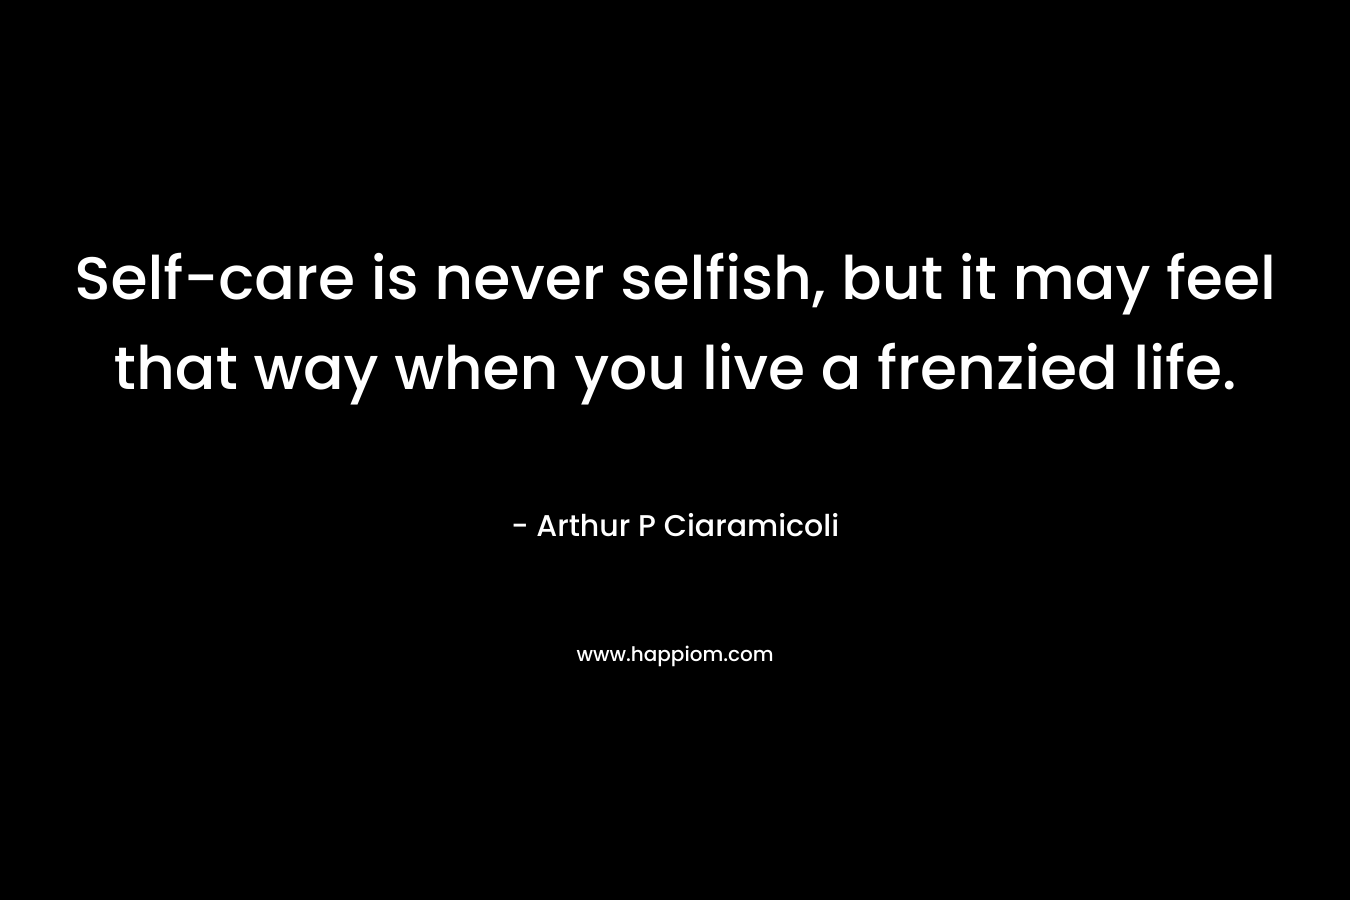 Self-care is never selfish, but it may feel that way when you live a frenzied life.